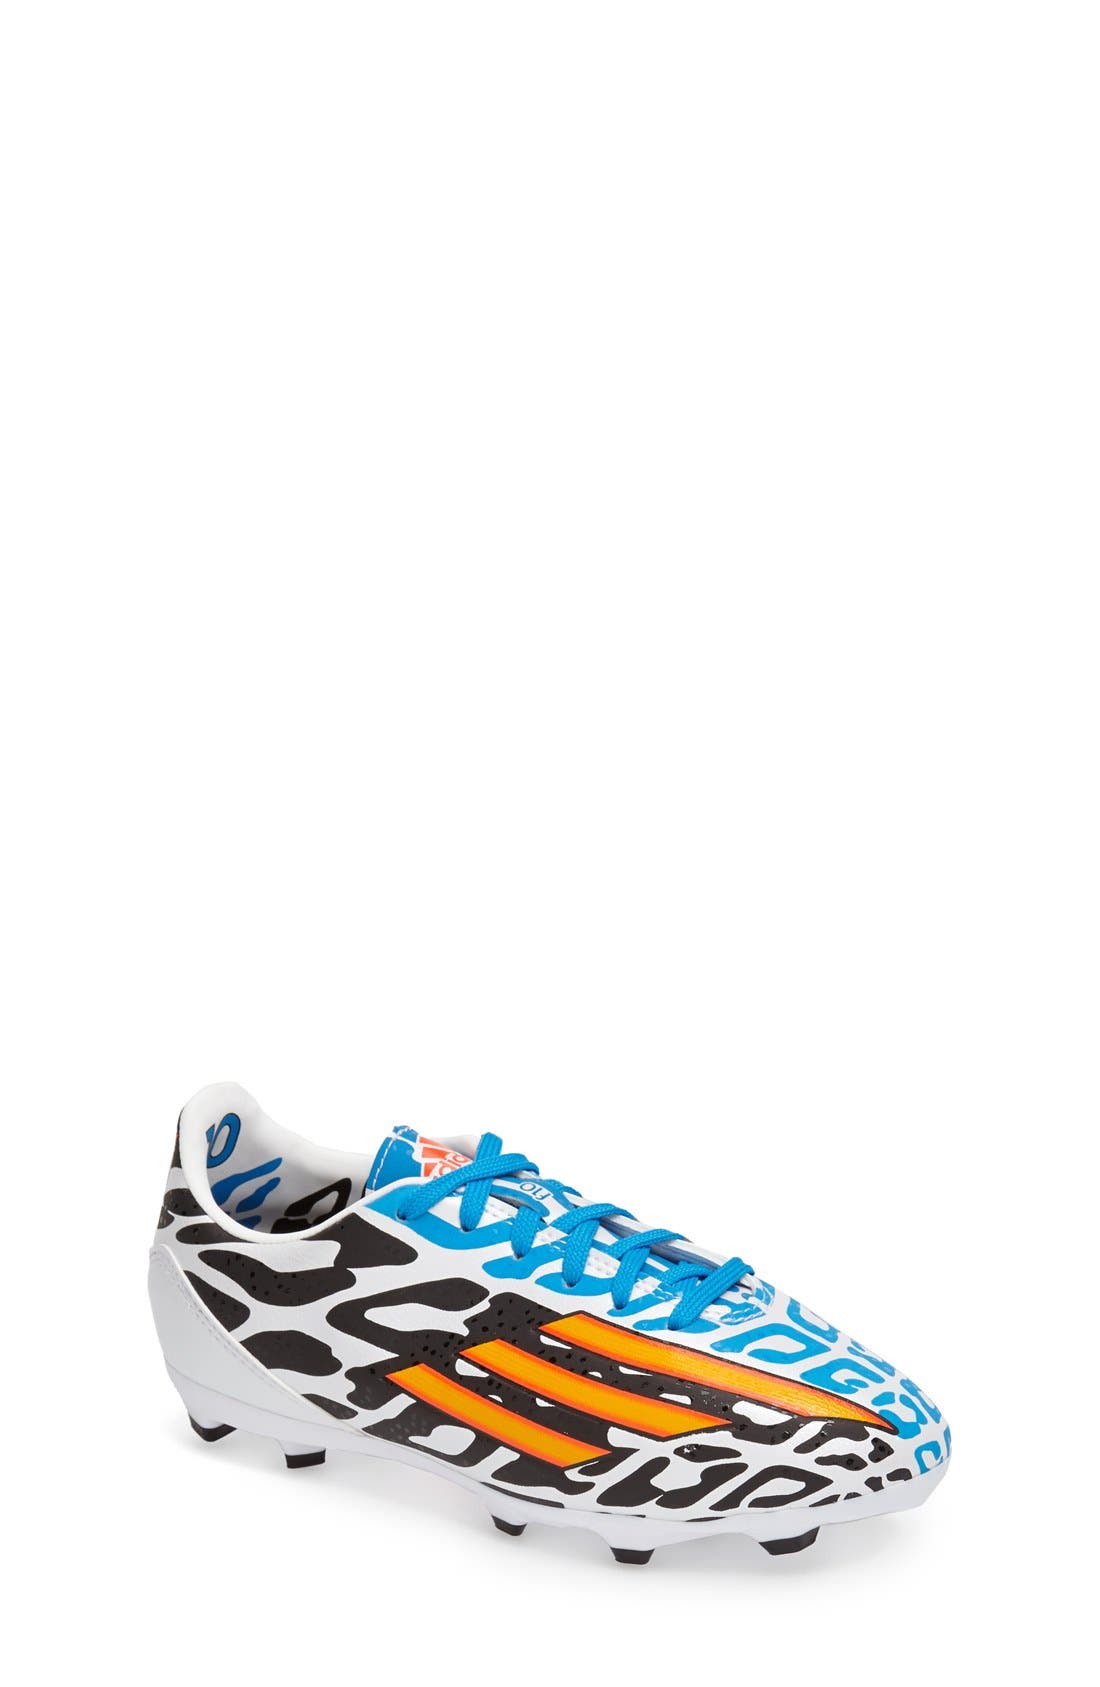 messi world cup cleats 2014